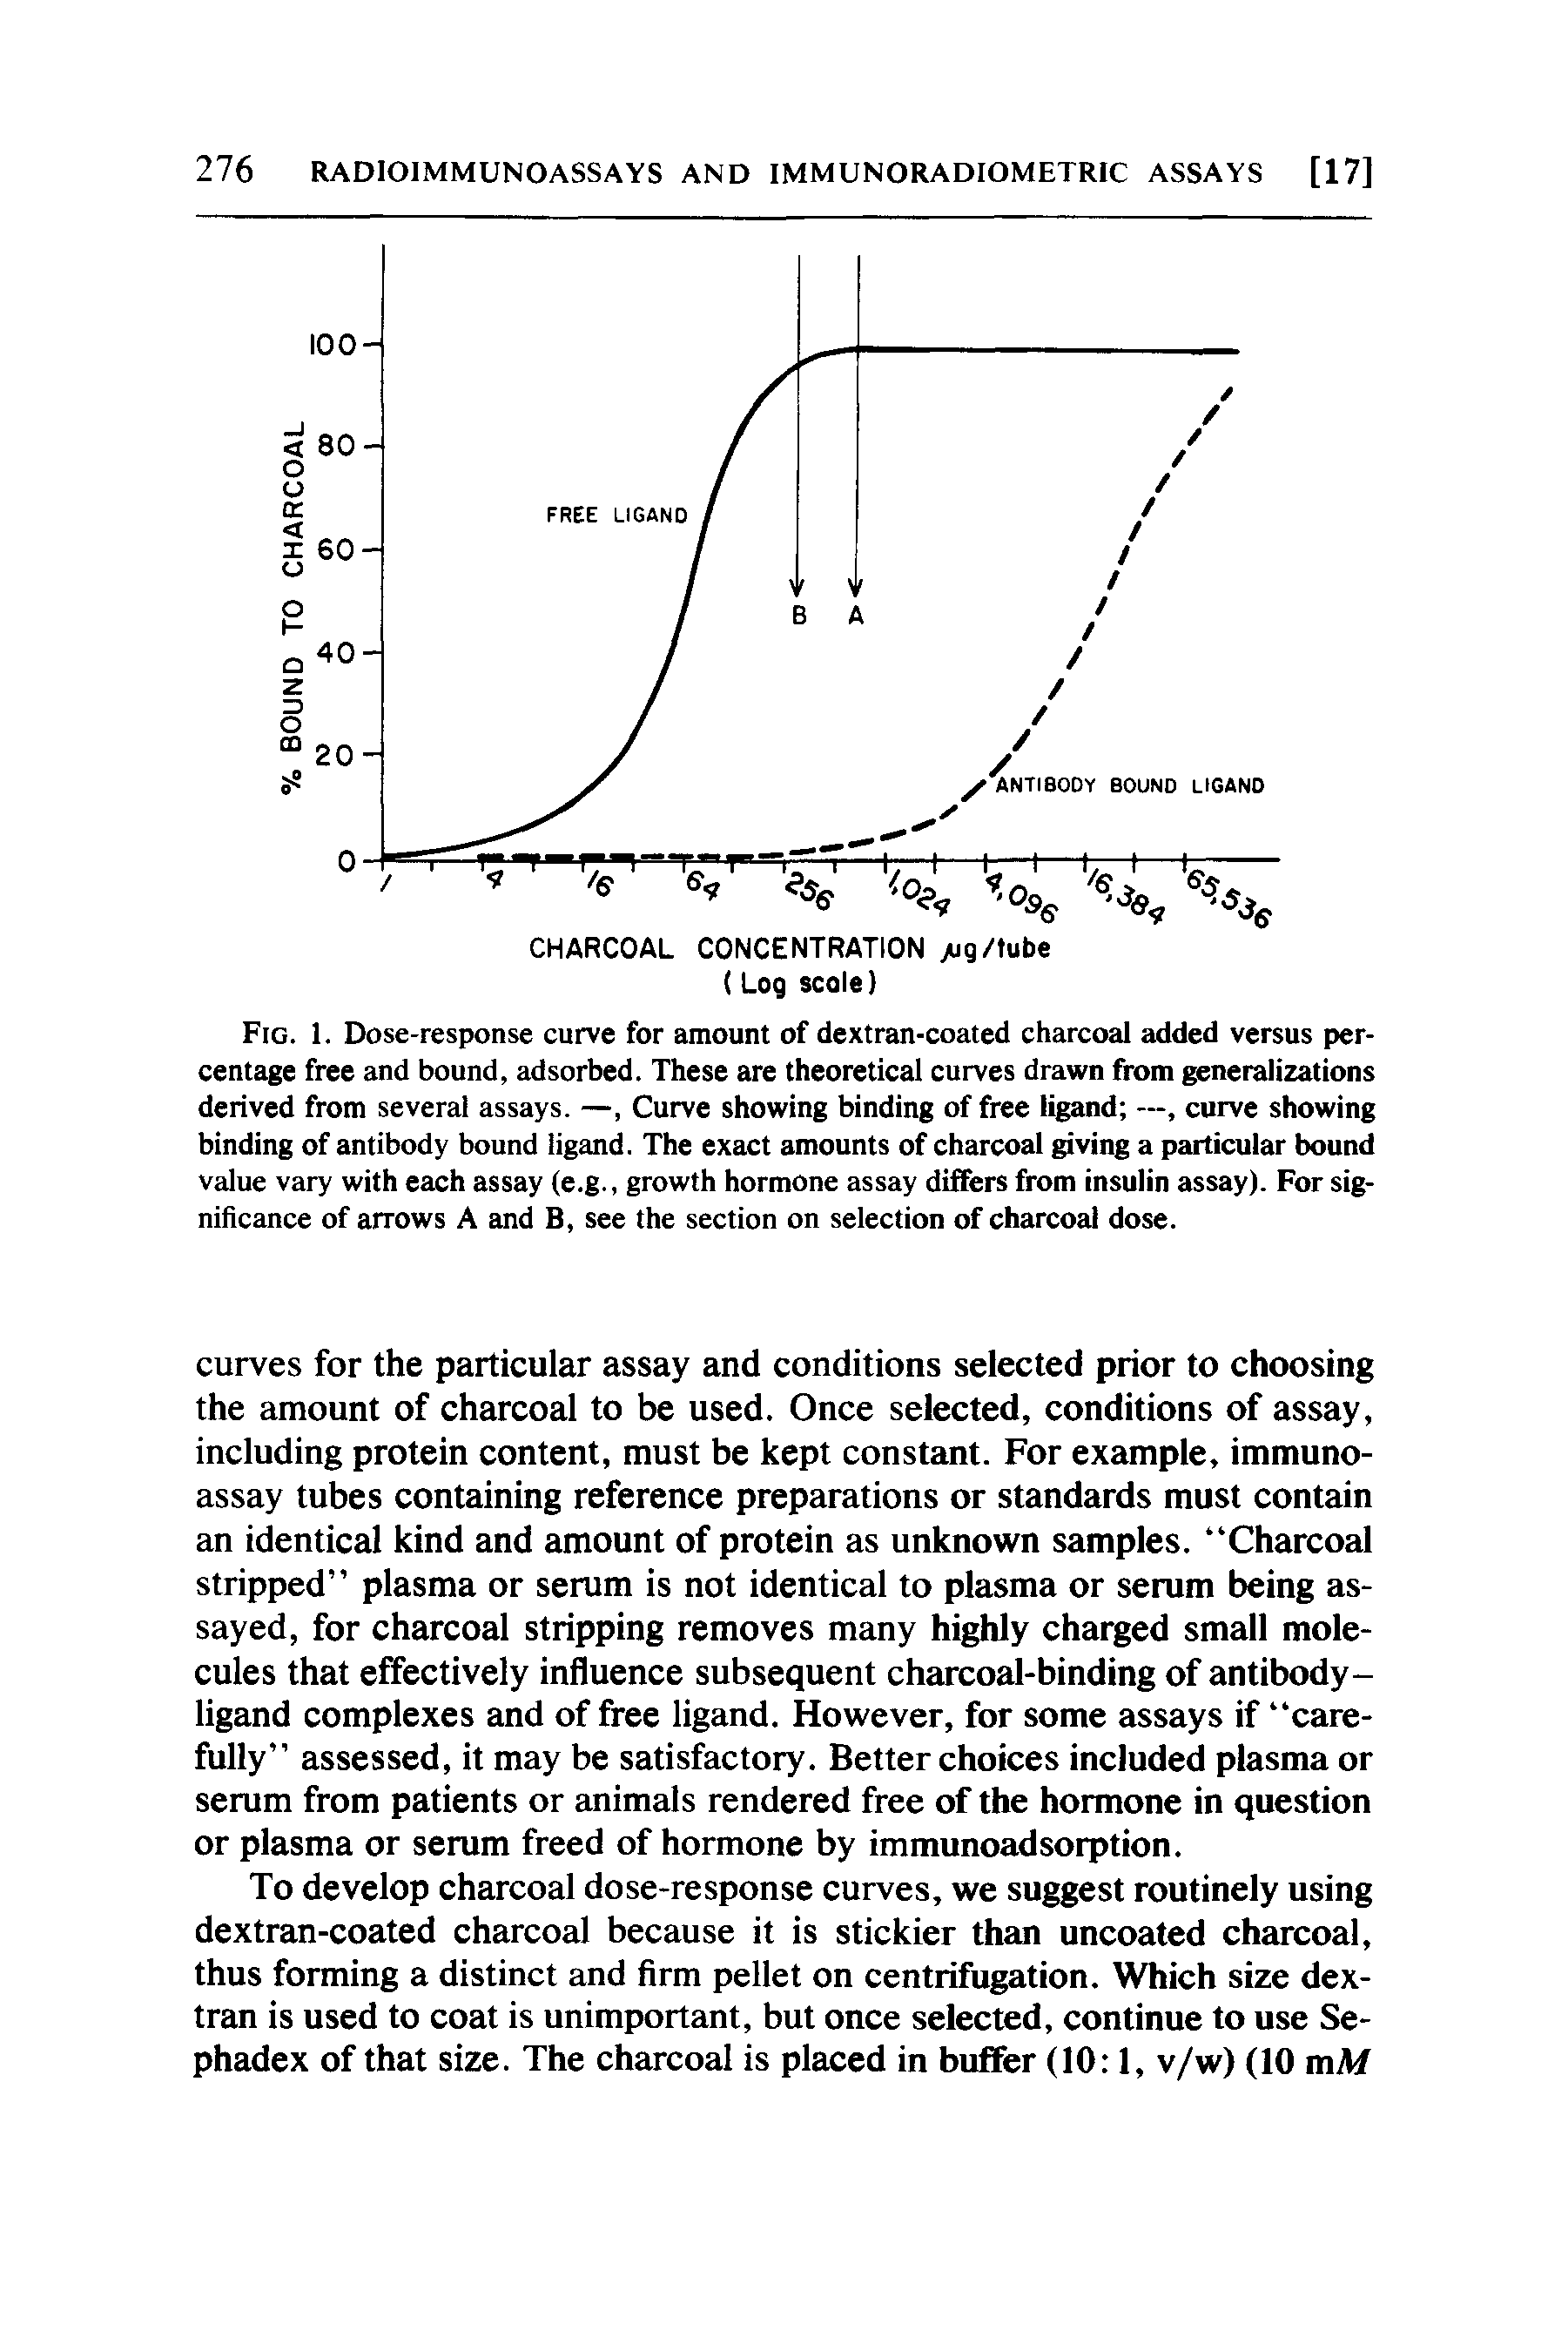 Fig. 1. Dose-response curve for amount of dextran-coated charcoal added versus percentage free and bound, adsorbed. These are theoretical curves drawn from generalizations derived from several assays. —, Curve showing binding of free ligand —, curve showing binding of antibody bound ligand. The exact amounts of charcoal giving a particular bound value vary with each assay (e.g., growth hormone assay differs from insulin assay). For significance of arrows A and B, see the section on selection of charcoal dose.